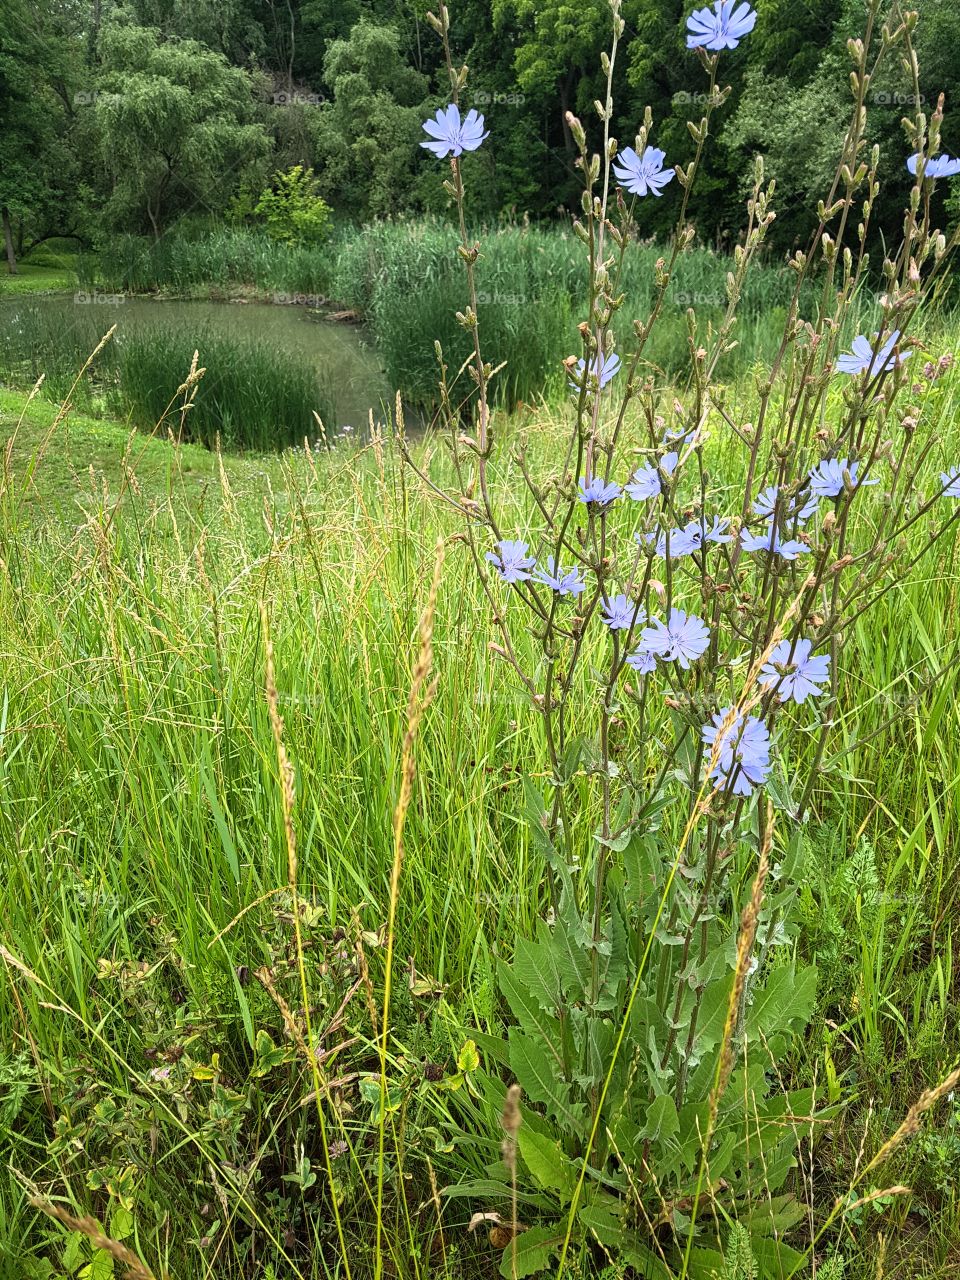 Purple flowers growing on a hillside by a small pond.